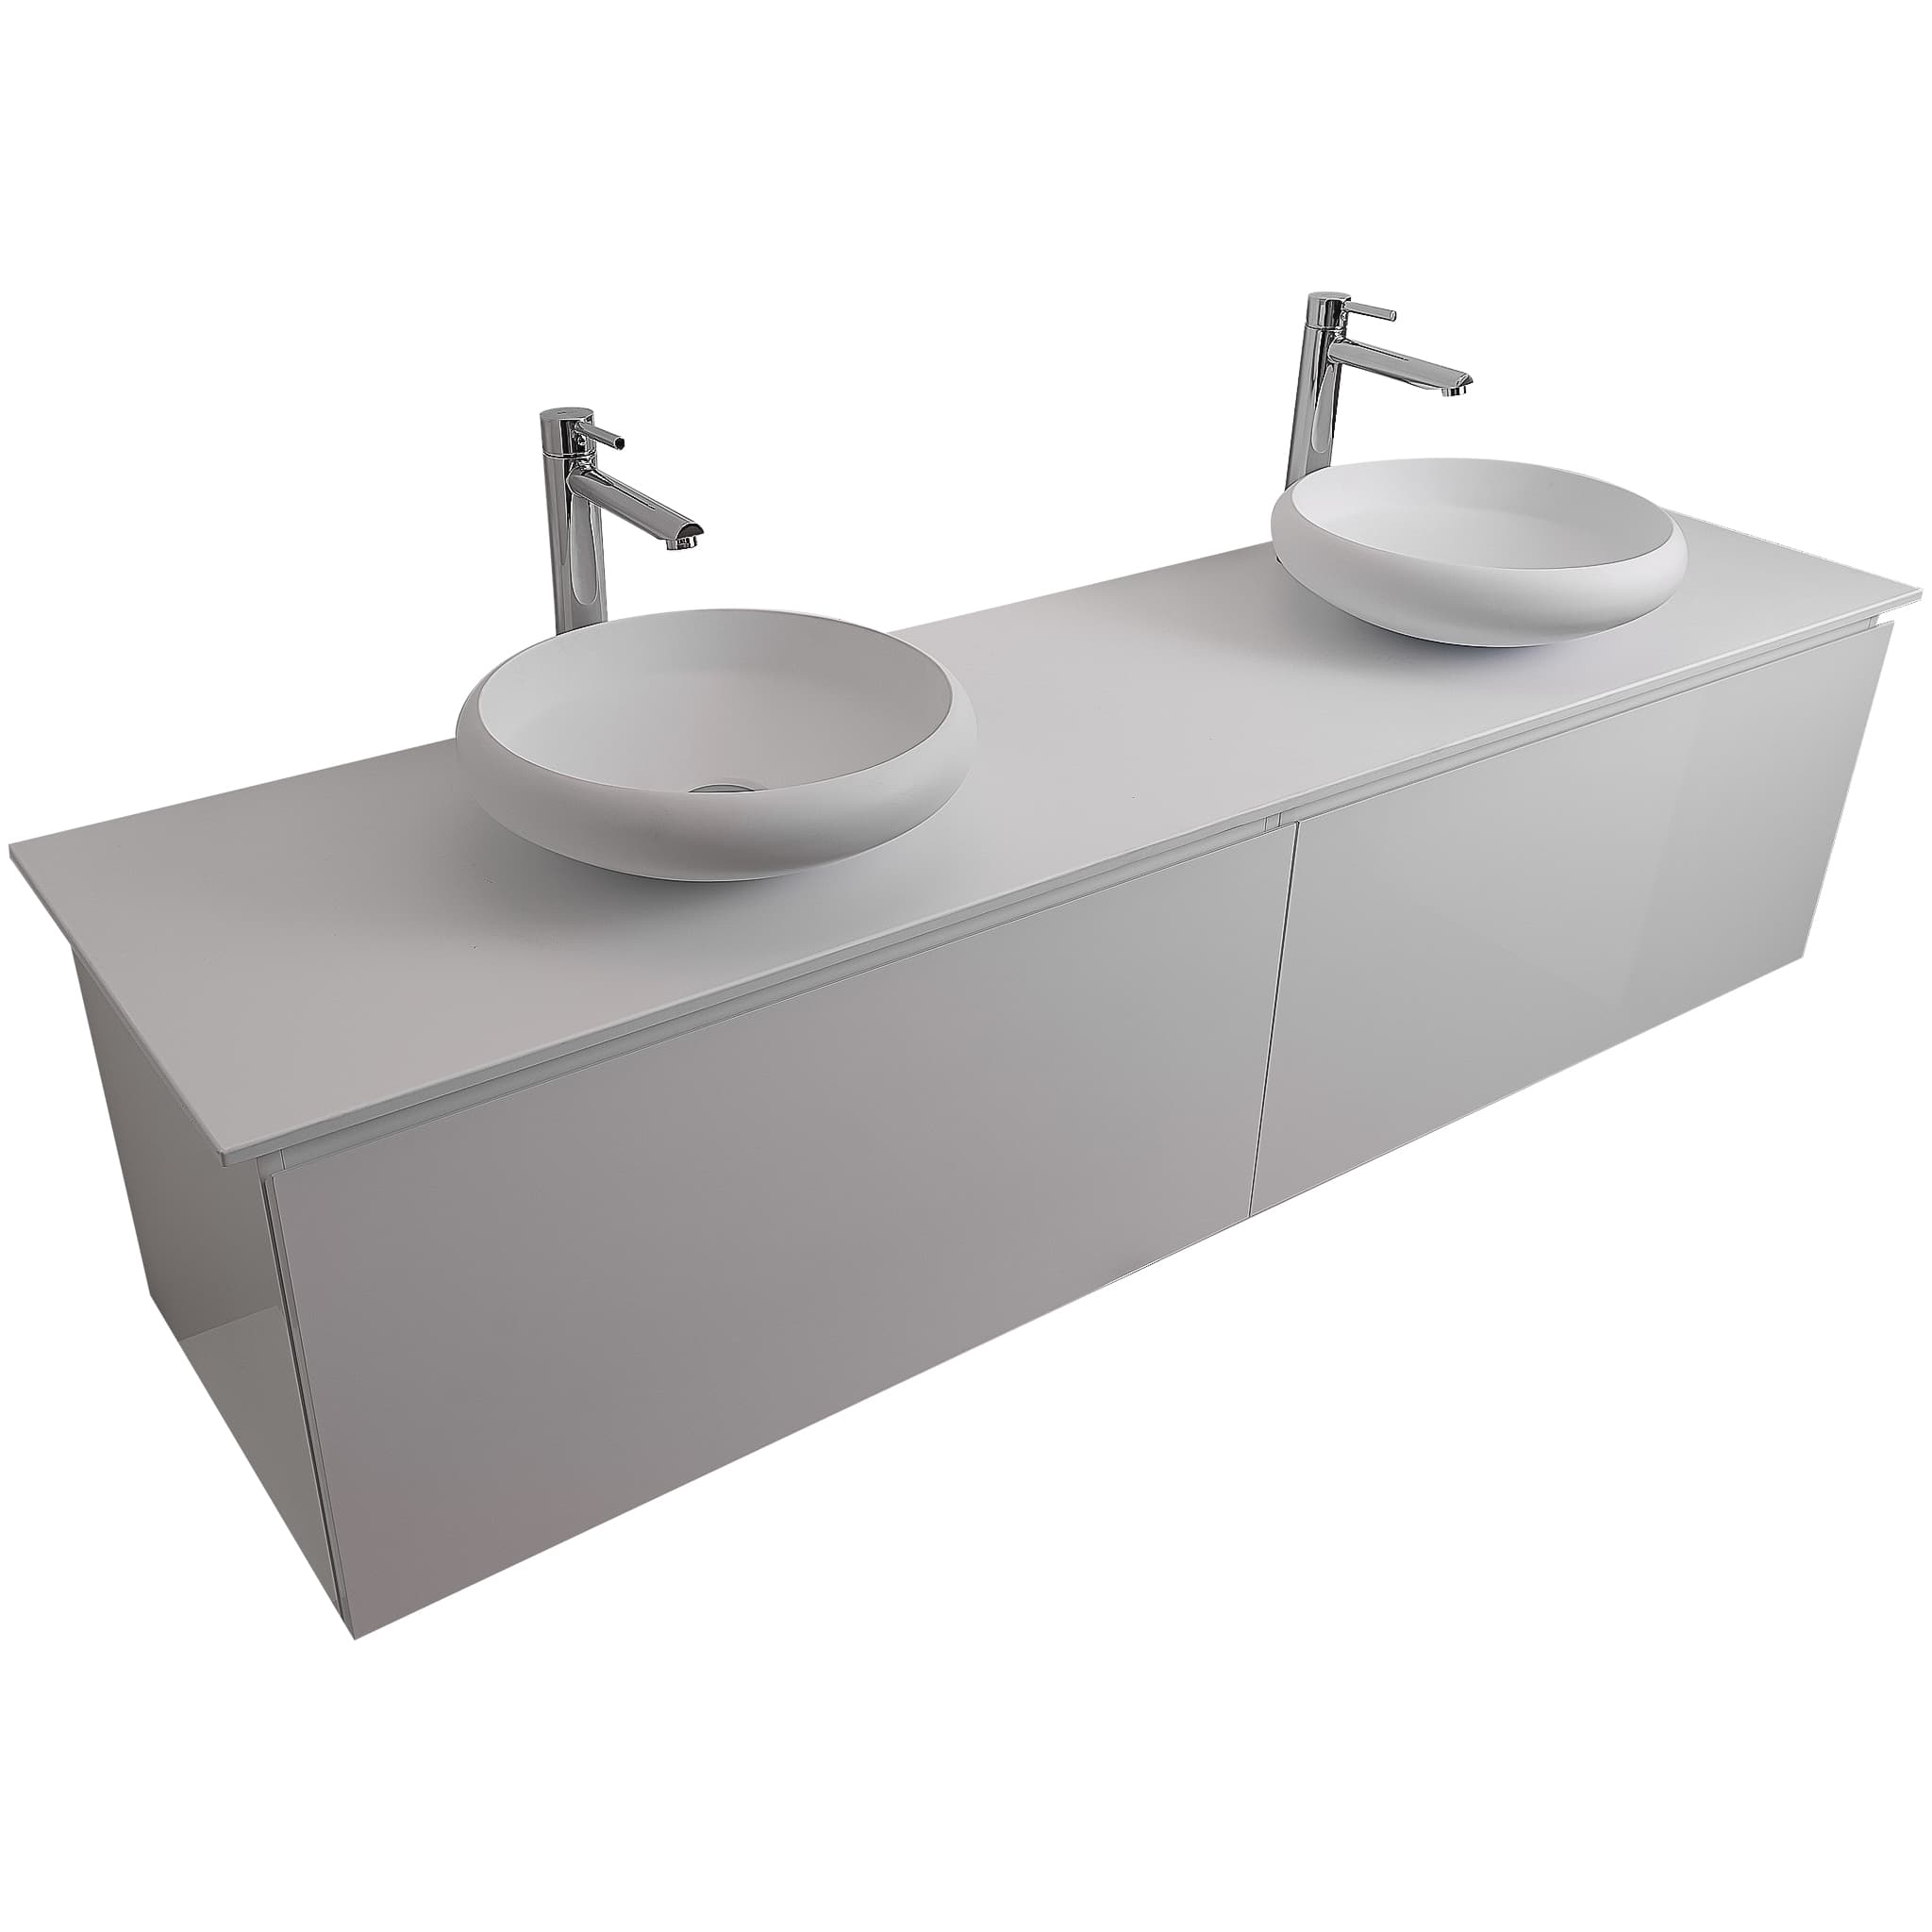 Venice 72 White High Gloss Cabinet, Solid Surface Flat White Counter And Two Round Solid Surface White Basin 1153, Wall Mounted Modern Vanity Set